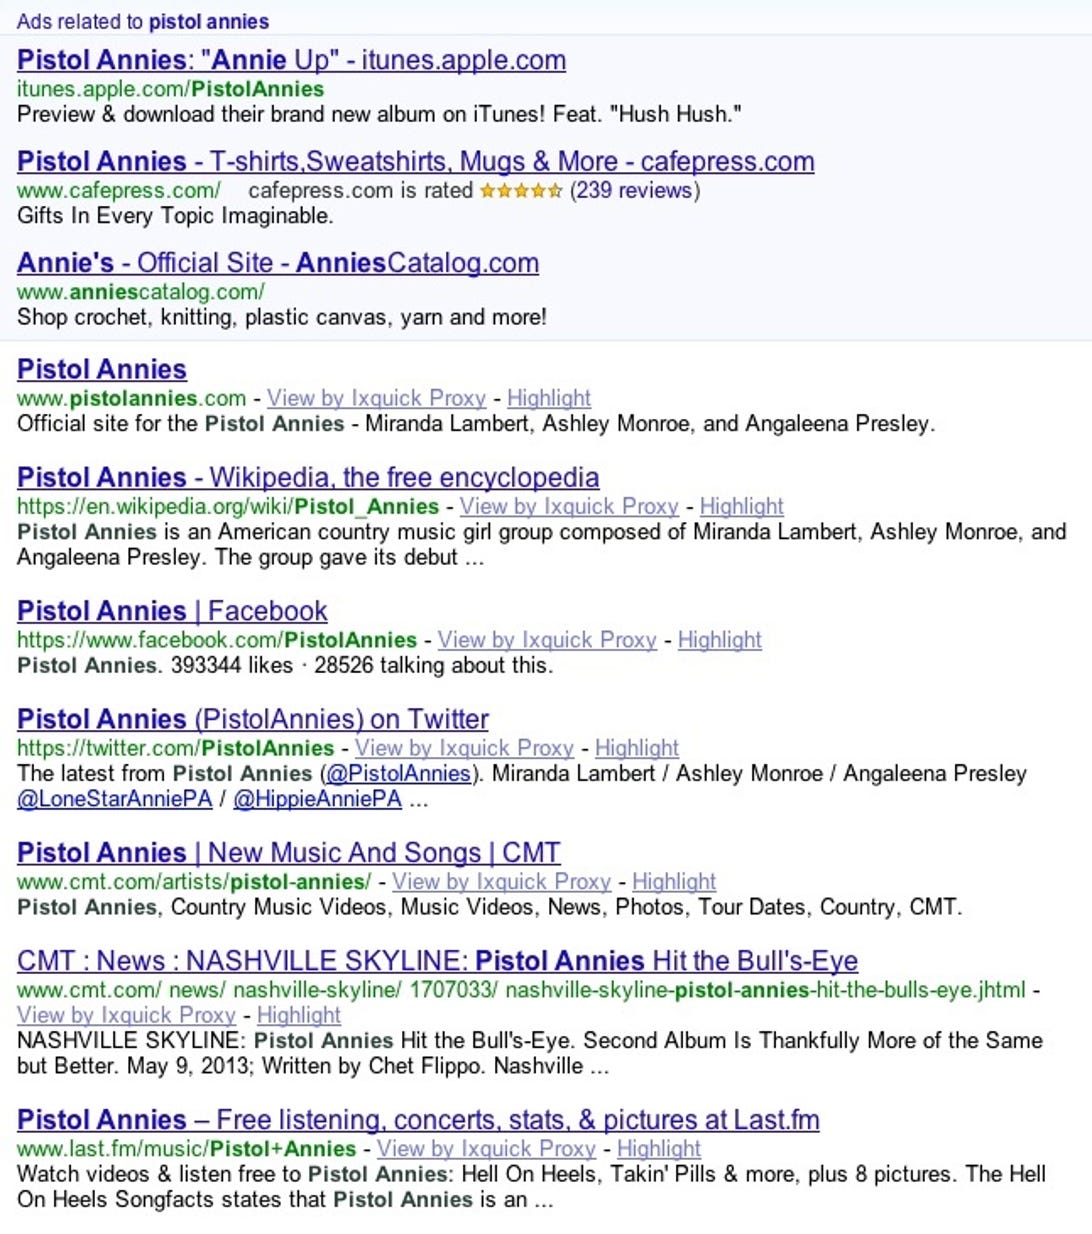 Startpage search results for "Pistol Annies"